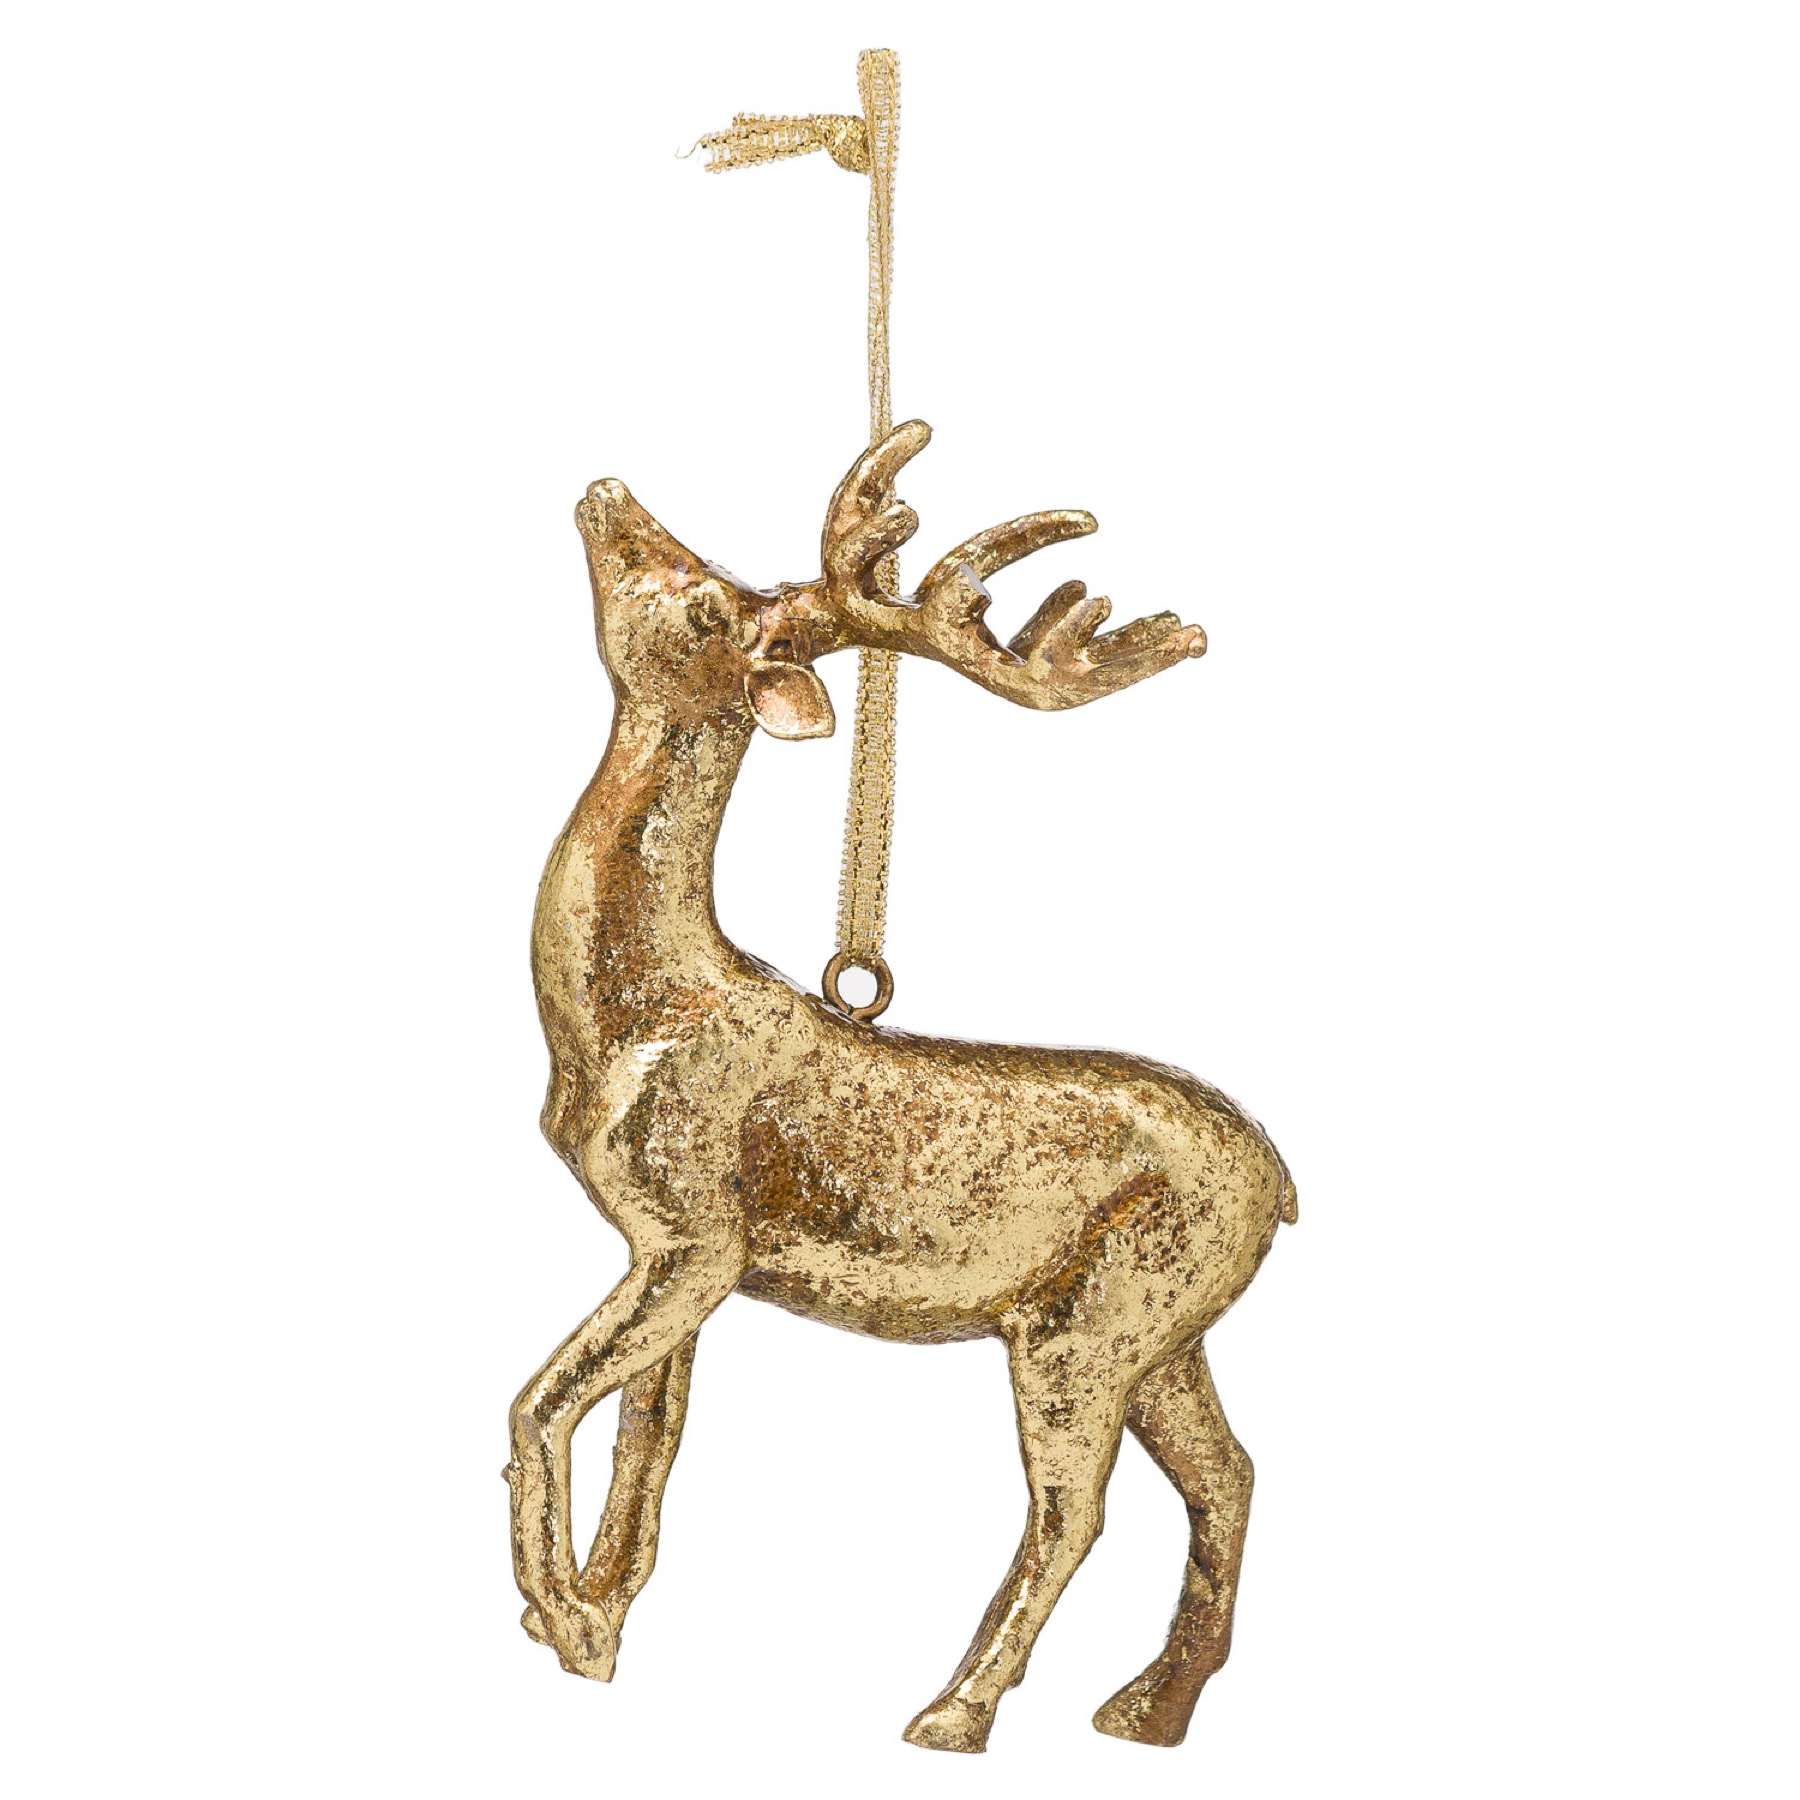 Hanging Gold Stag Ornament - Image 1